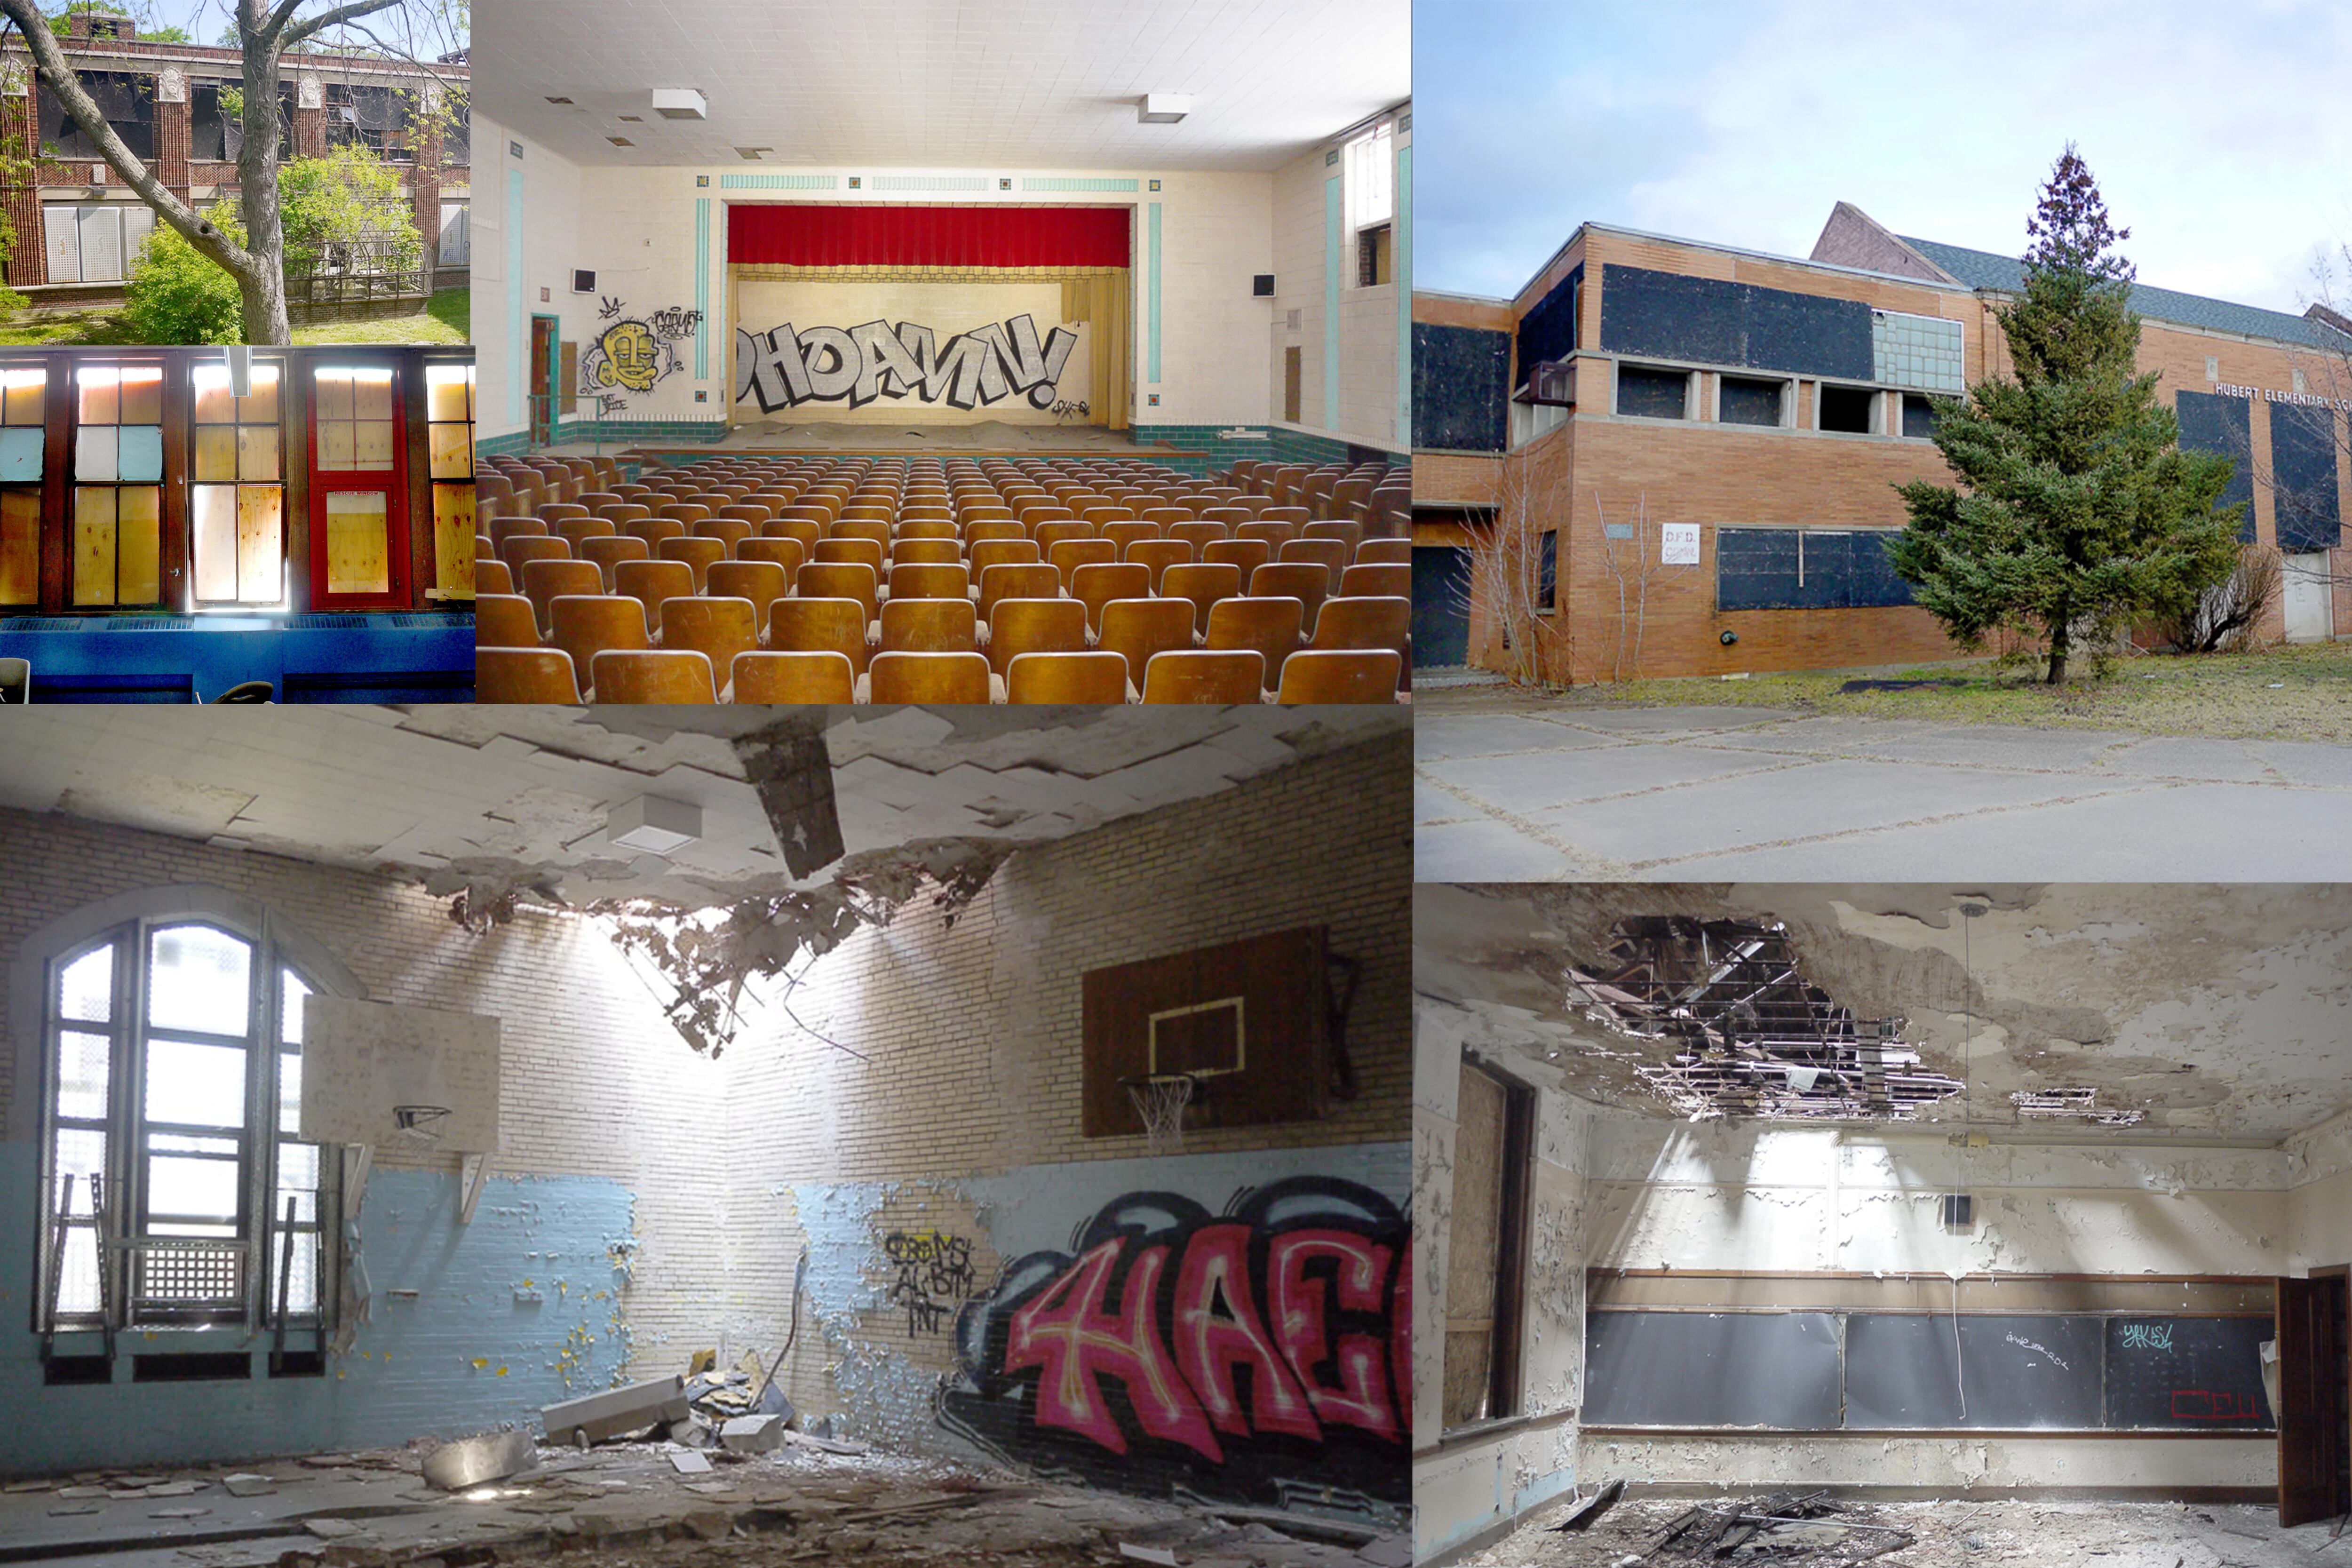 A collage of images from abandoned Detroit schools. There are six pictures of different sizes, showing auditoriums, gymnasiums, classrooms and exteriors with varying levels of decay after years of neglect.